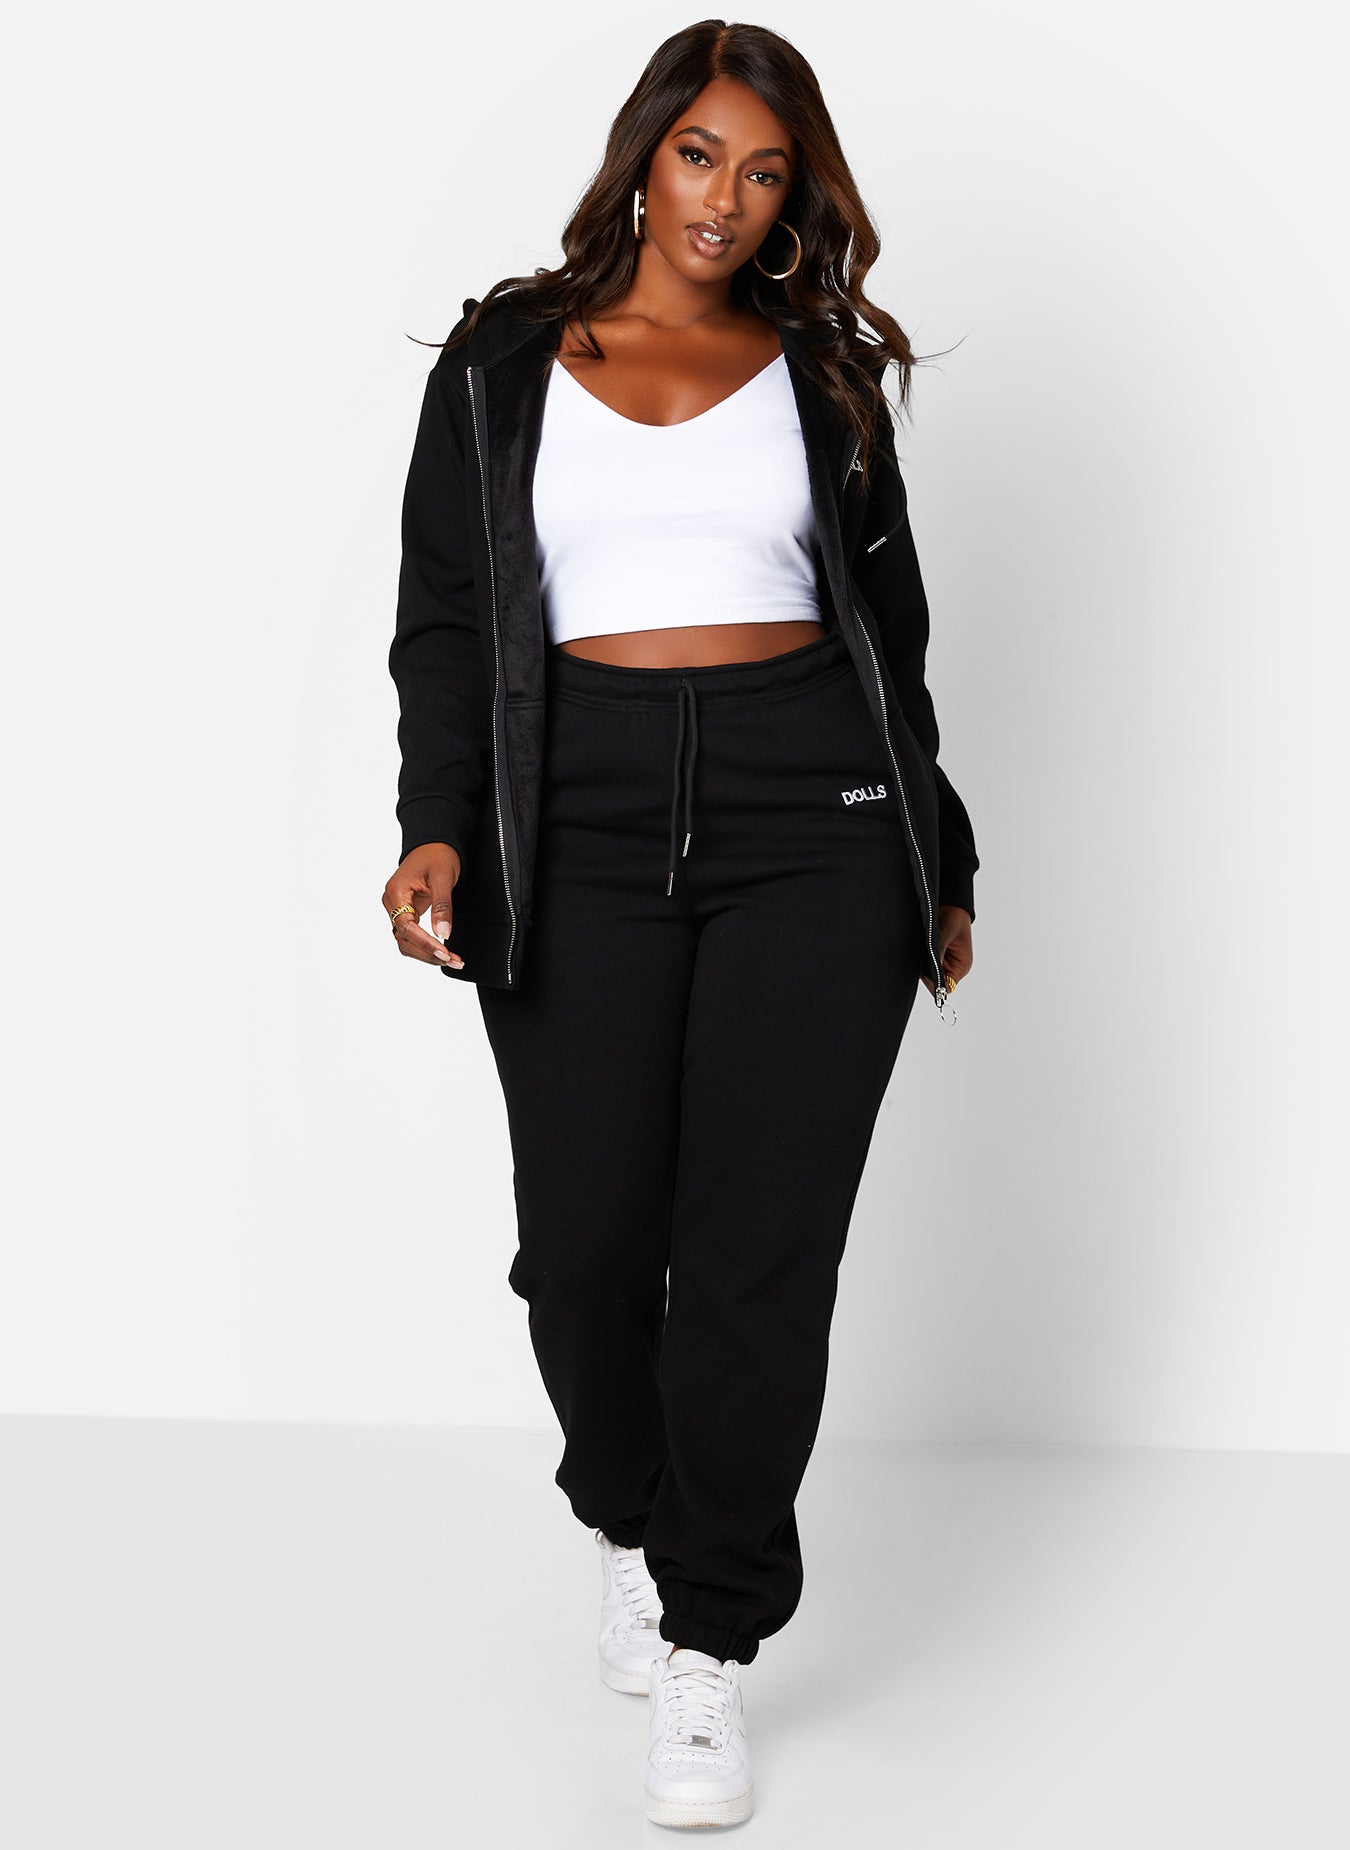 Black Goals Embroidered Drawstring Joggers W. Pockets Plus Sizes